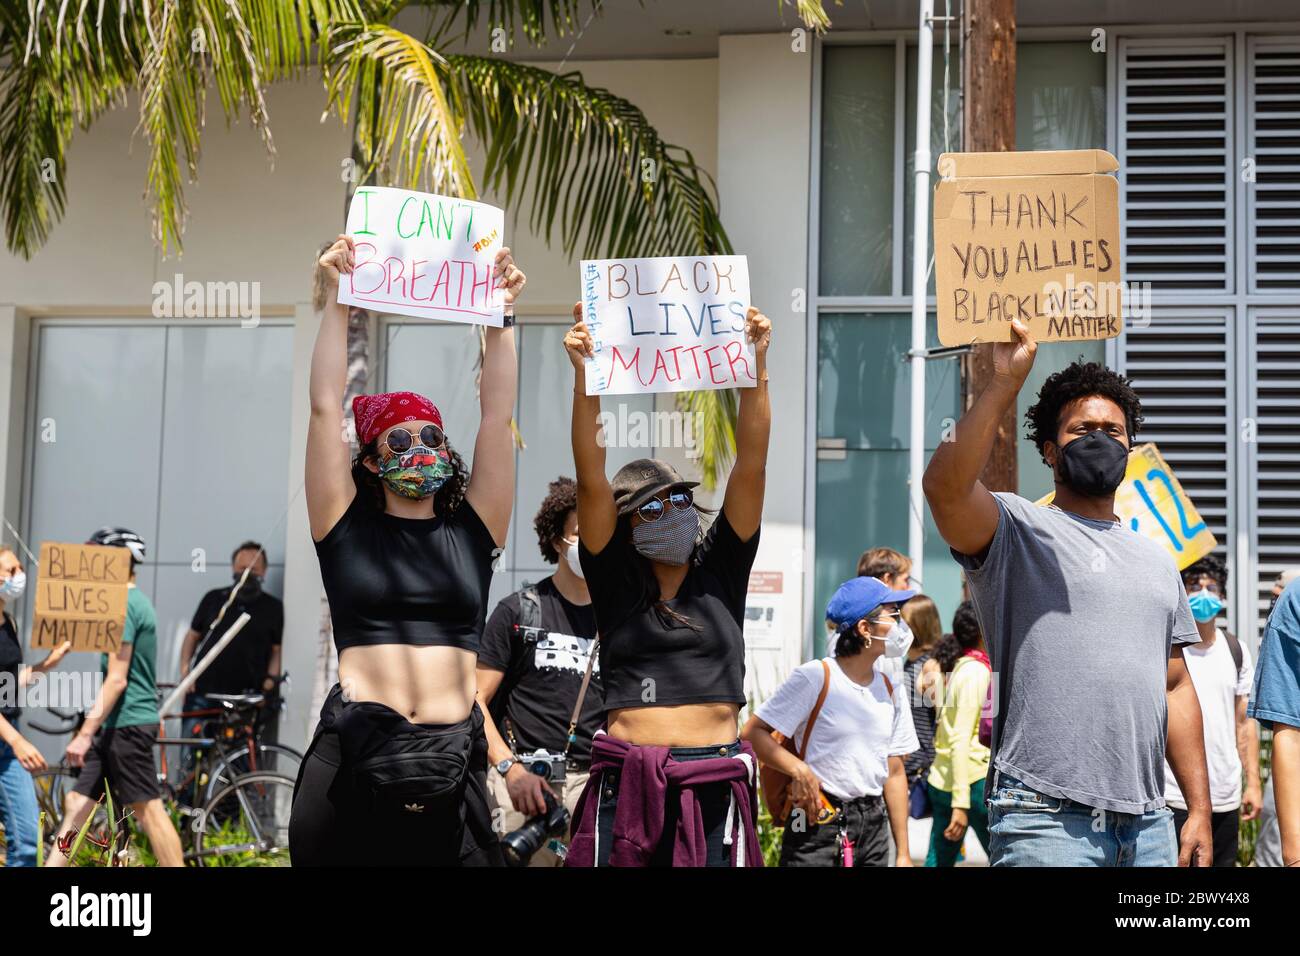 Protesters at Black Lives Matter protest over the killing of George Floyd by police officers: Fairfax District, Los Angeles, CA, USA - May 30, 2020 Stock Photo